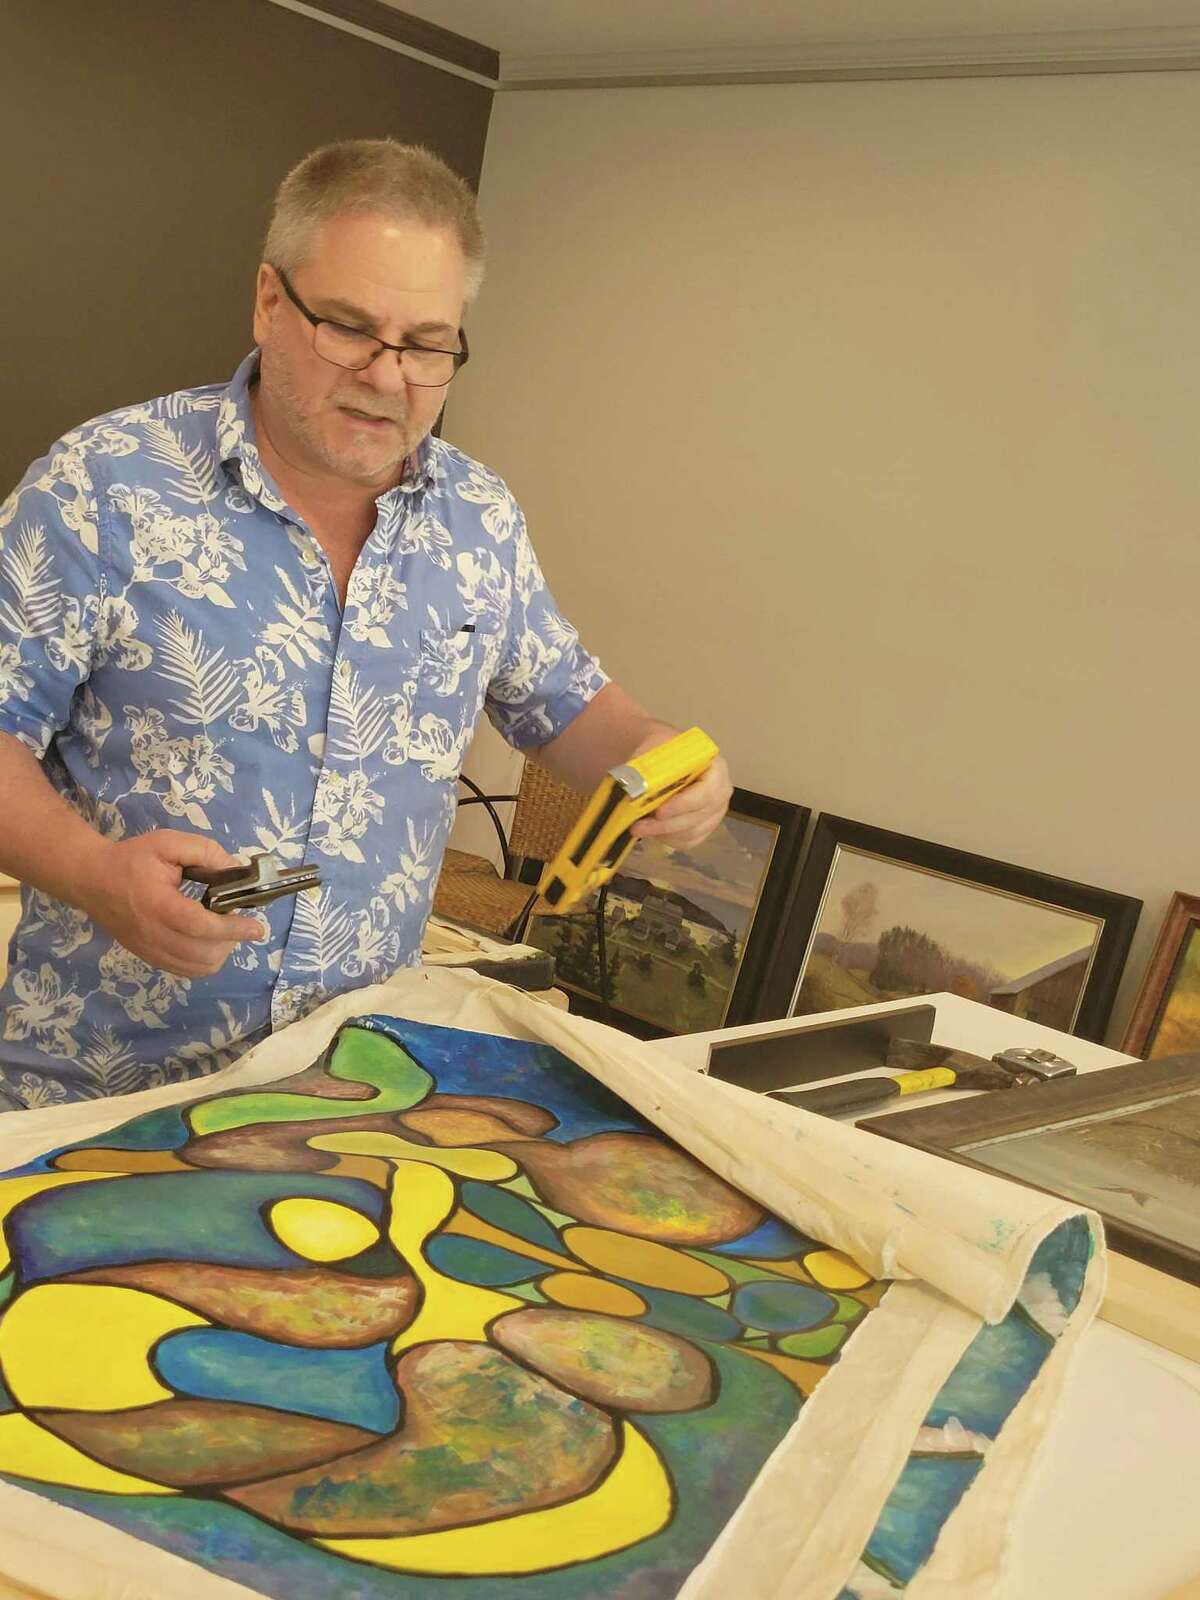 Greg Mullen's Gregory James Gallery and Framing has moved into a 3,200-square-foot, newly remodeled space on Route 202 in New Milford. He is pictured prepping a canvas for stretching.